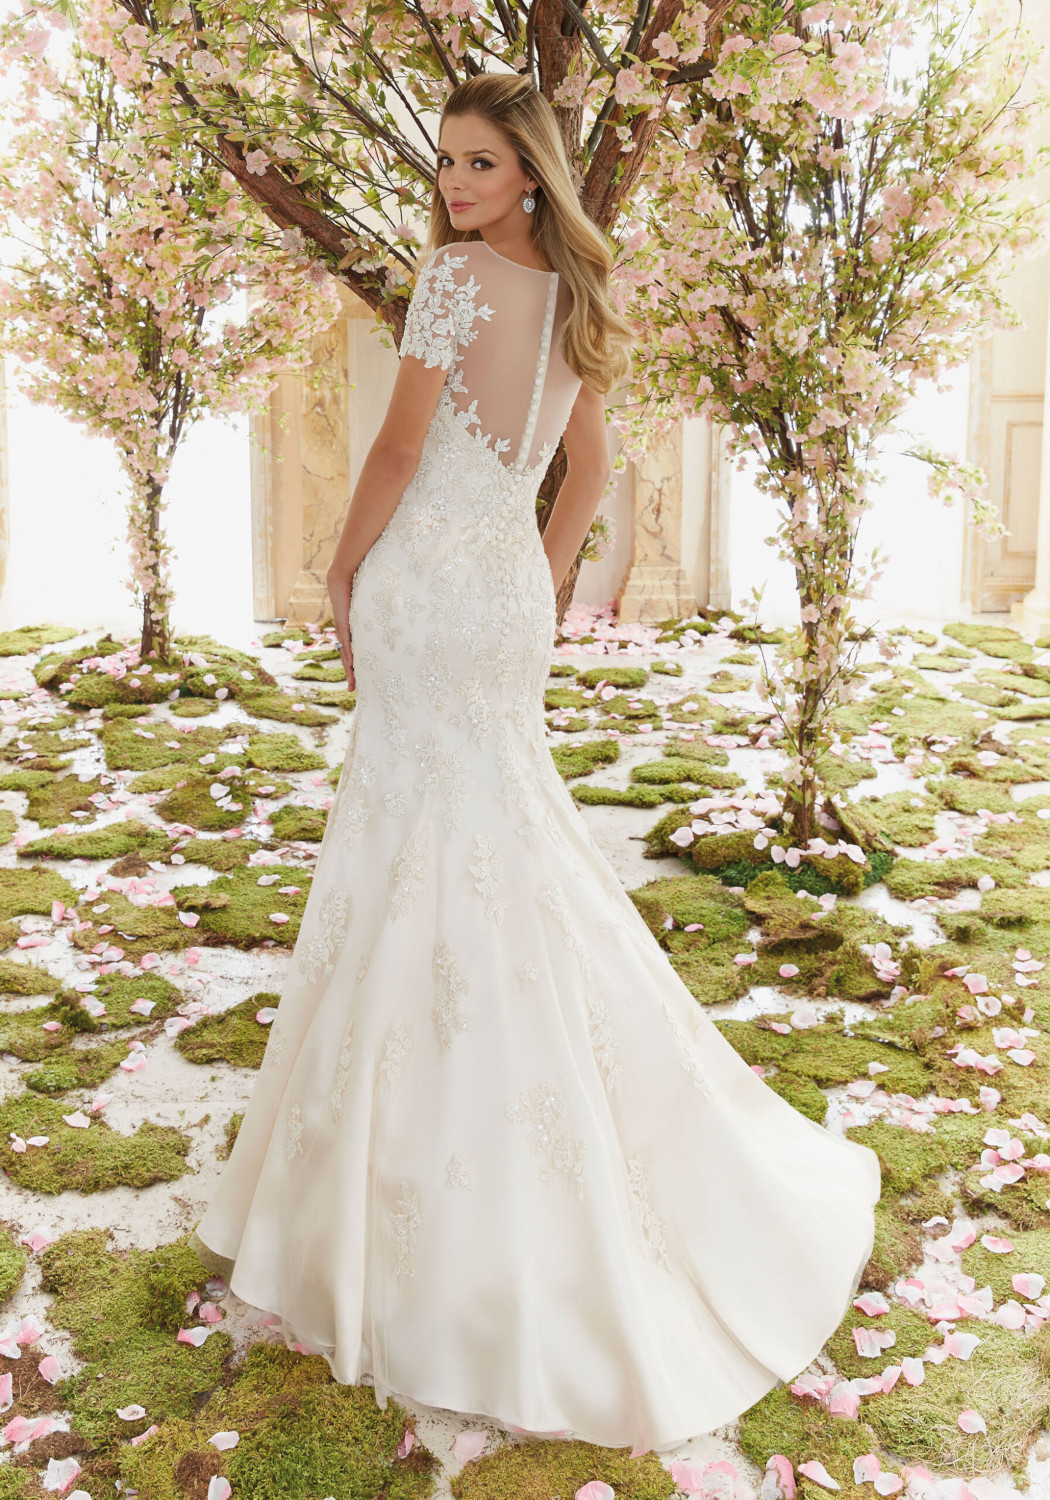 Beaded Venice Lace appliques on soft Net Wedding Dress. Style  6832